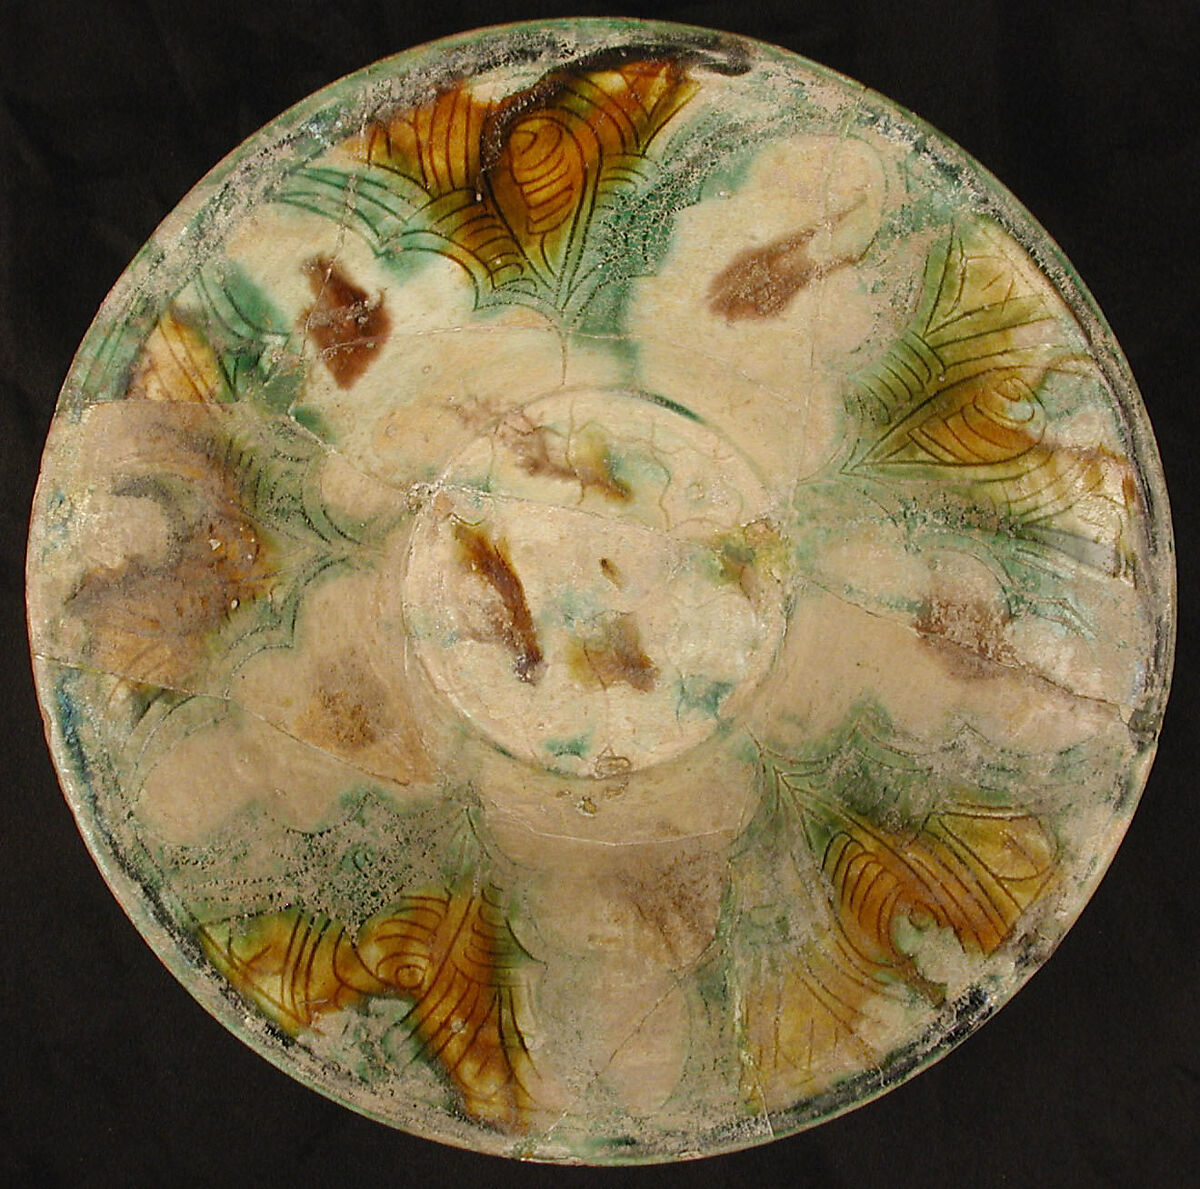 Bowl, Earthenware; white slip, incised and splashed with polychrome glazes under a transparent glaze (sgraffito ware) 